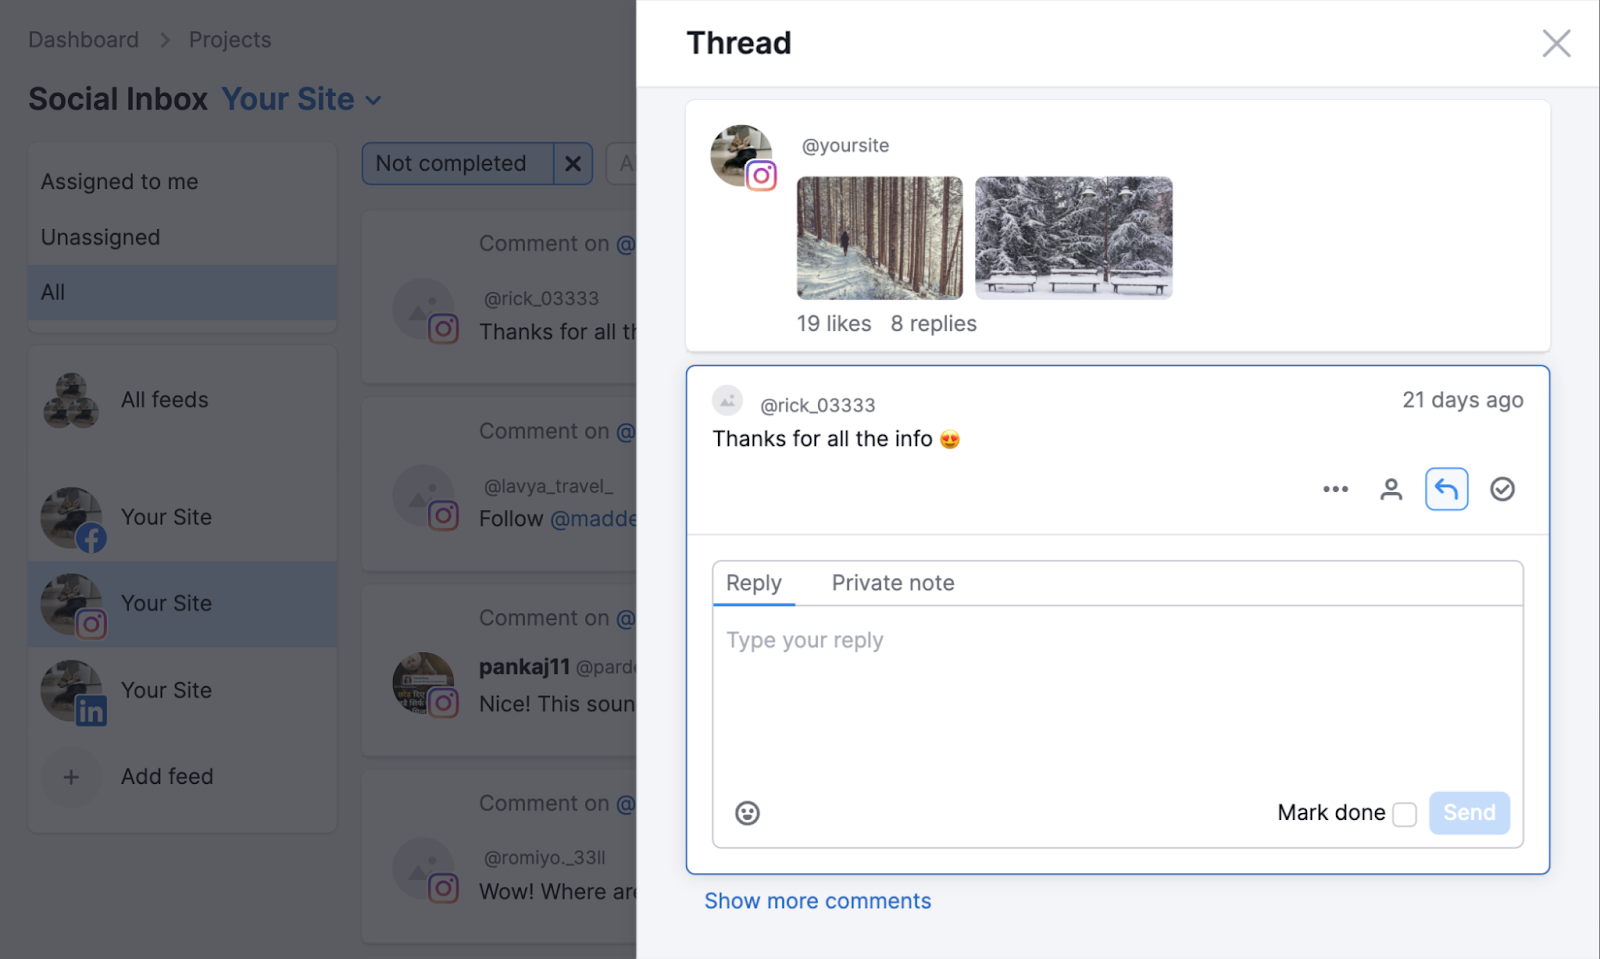 With Social Inbox you can respond to comments easily